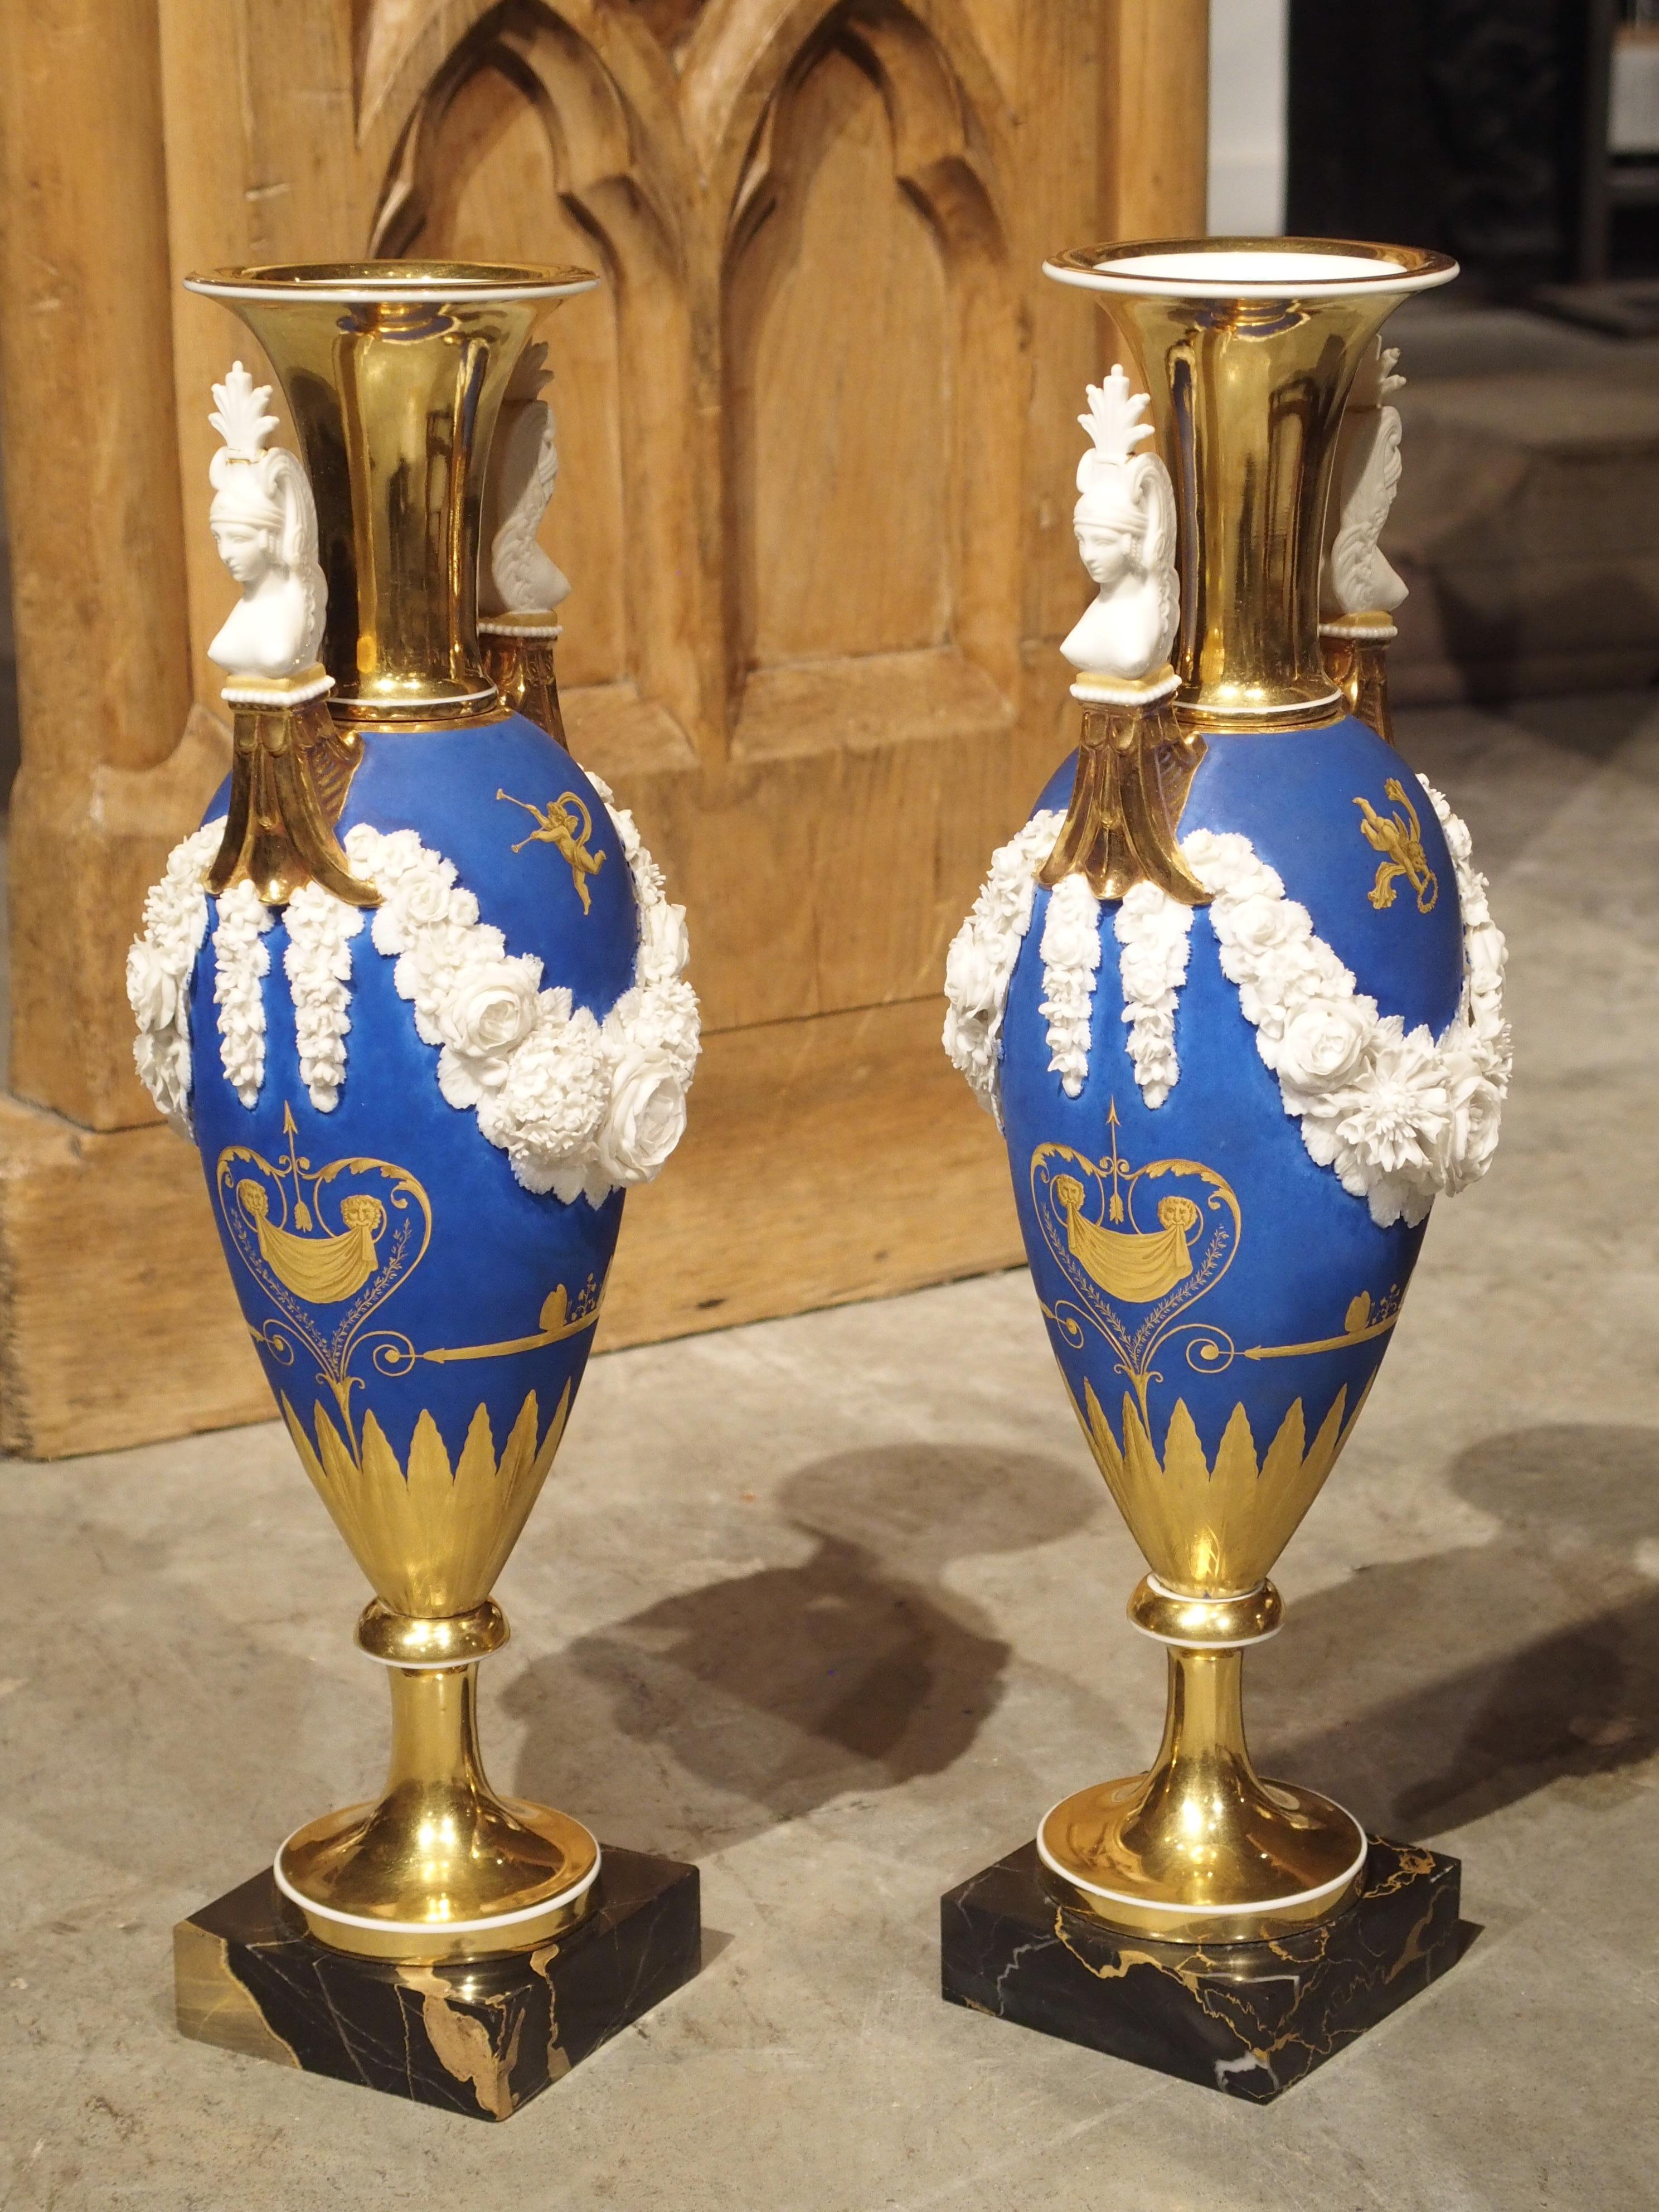 Pair of Neoclassical Paris Porcelain Vases in Royal French Blue, Early 1800s 5